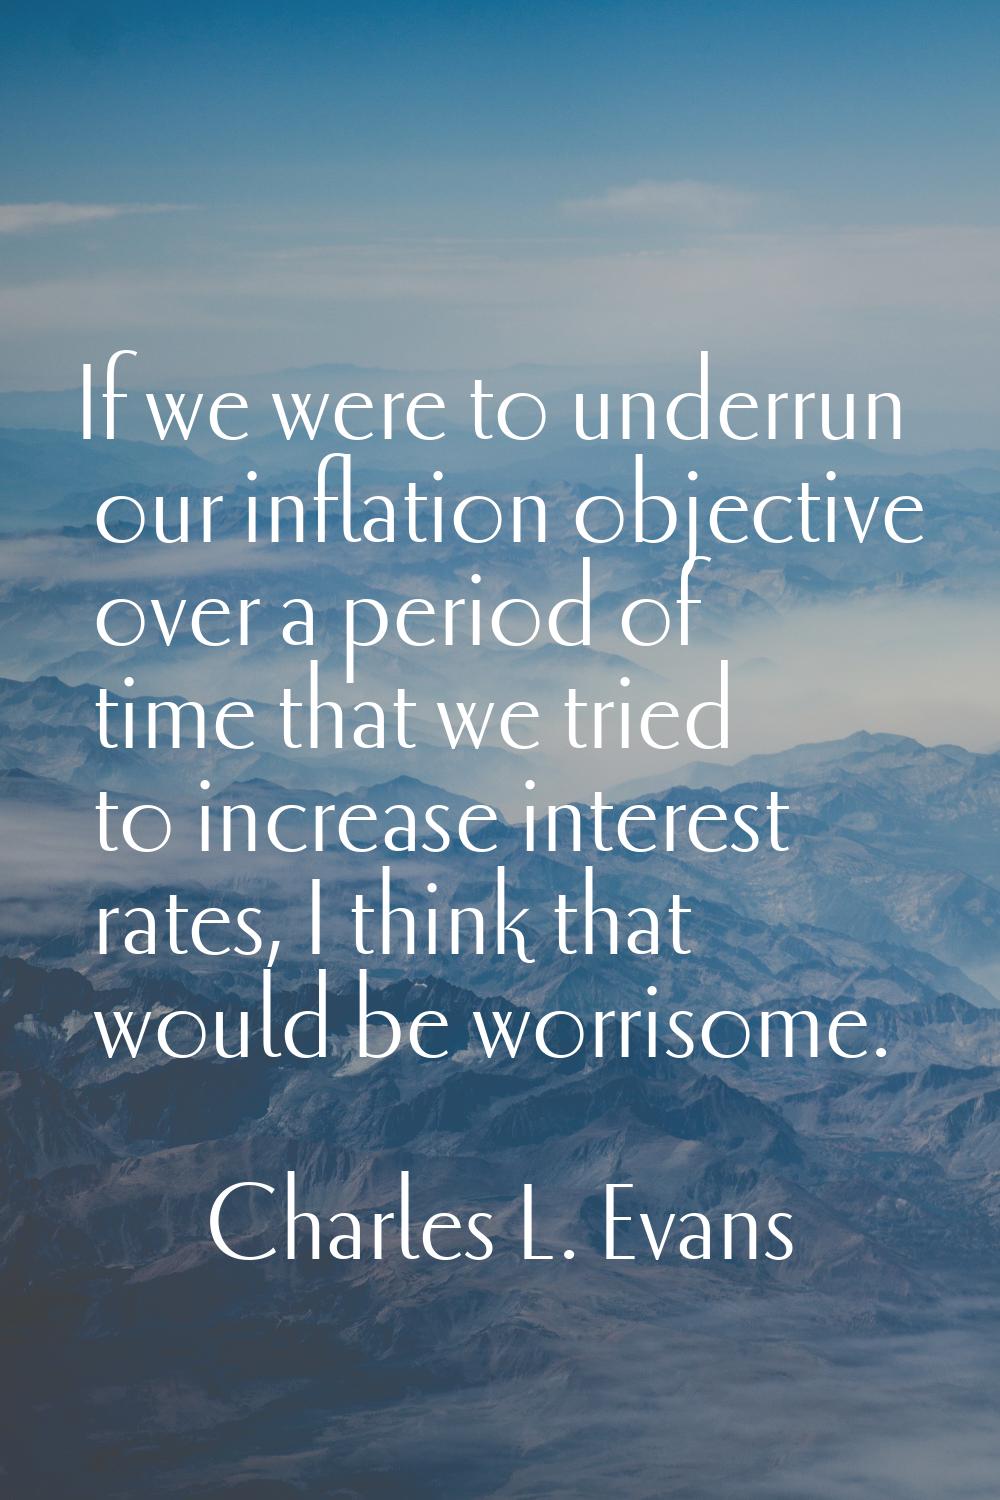 If we were to underrun our inflation objective over a period of time that we tried to increase inte